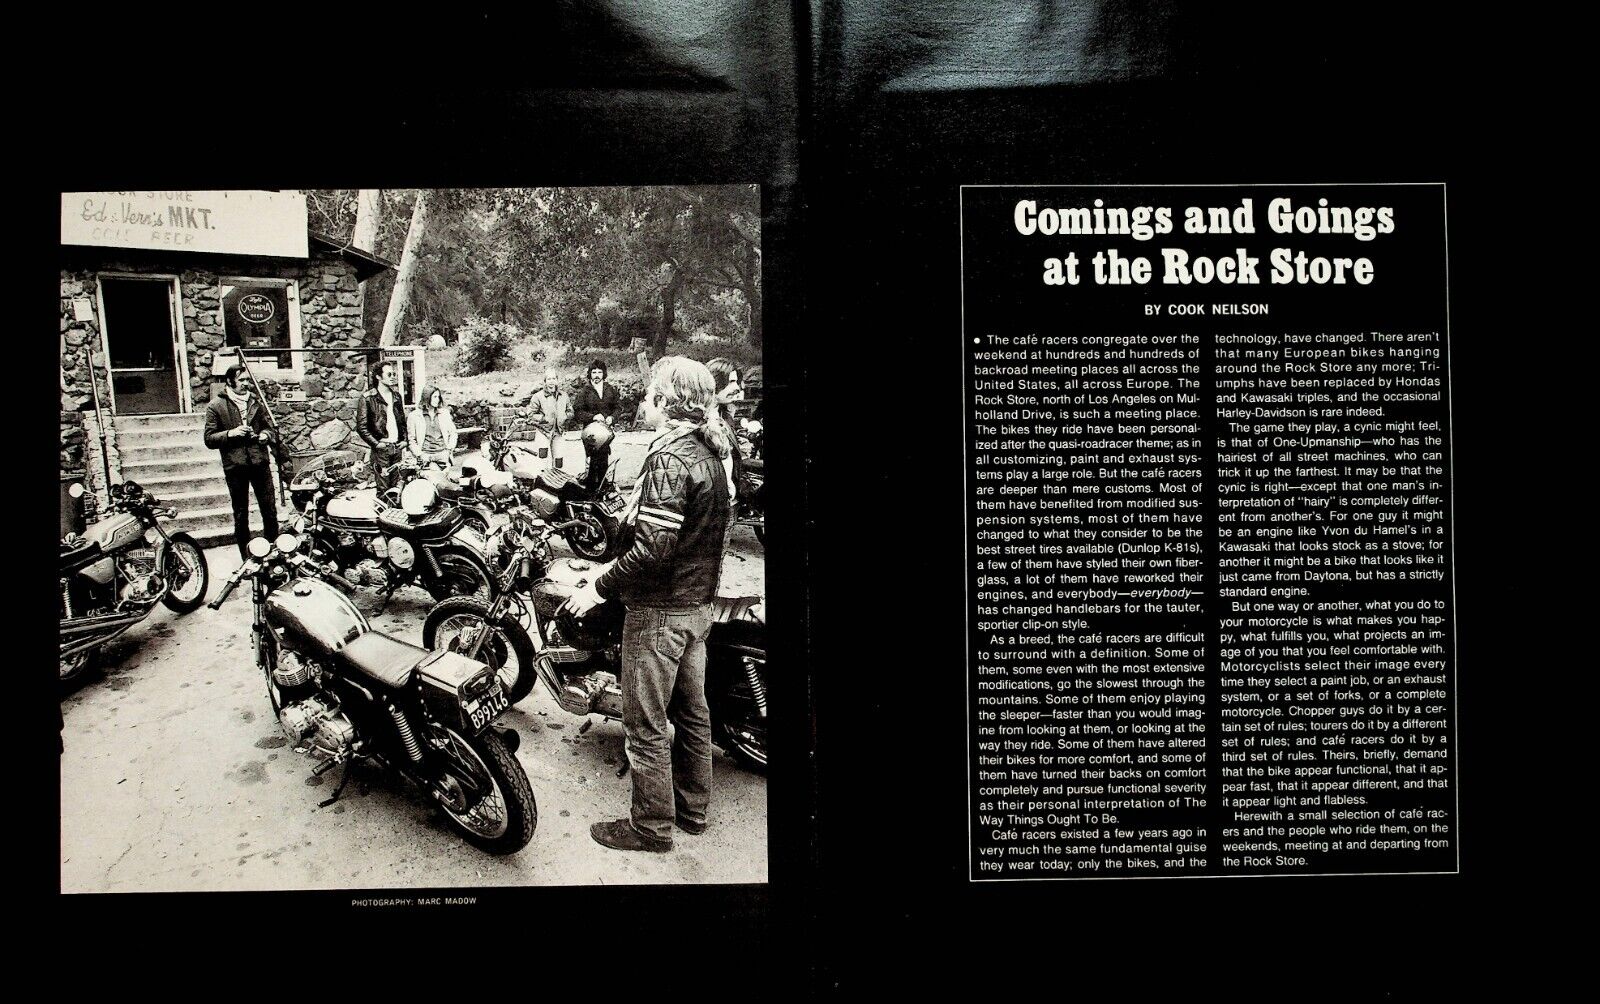 1973 Mulholland Drive Rock Store Cafe Racer Motorcycles - 5-Page Vintage Article